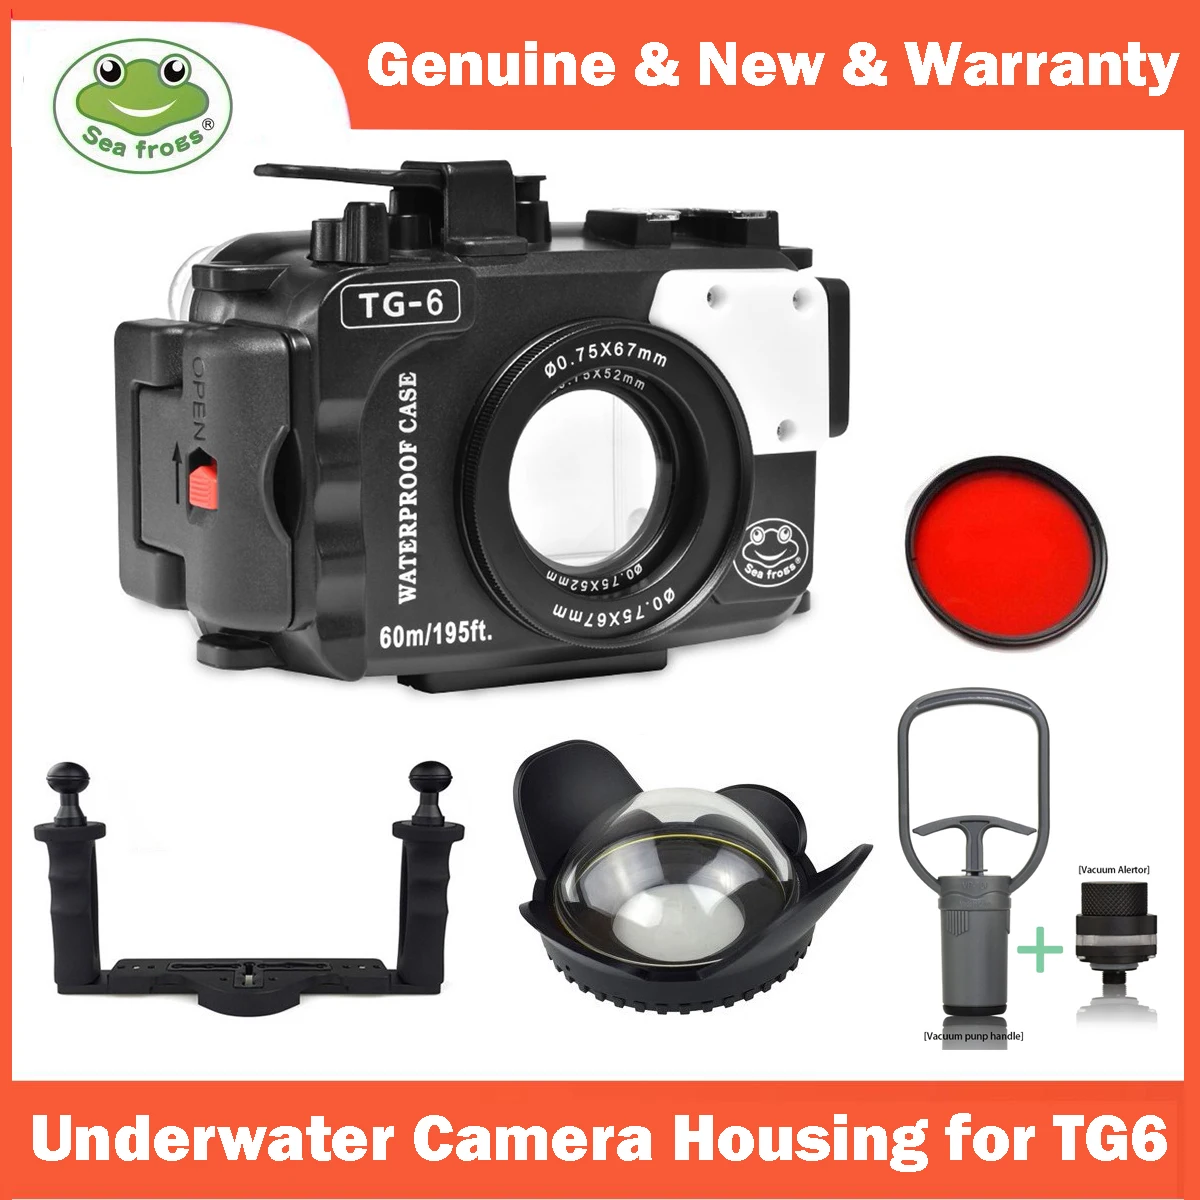 

Seafrogs 60M/195FT Underwater Camera Housing Kit for Olympus TG-6 TG6 with Dual Fiber-Optic port